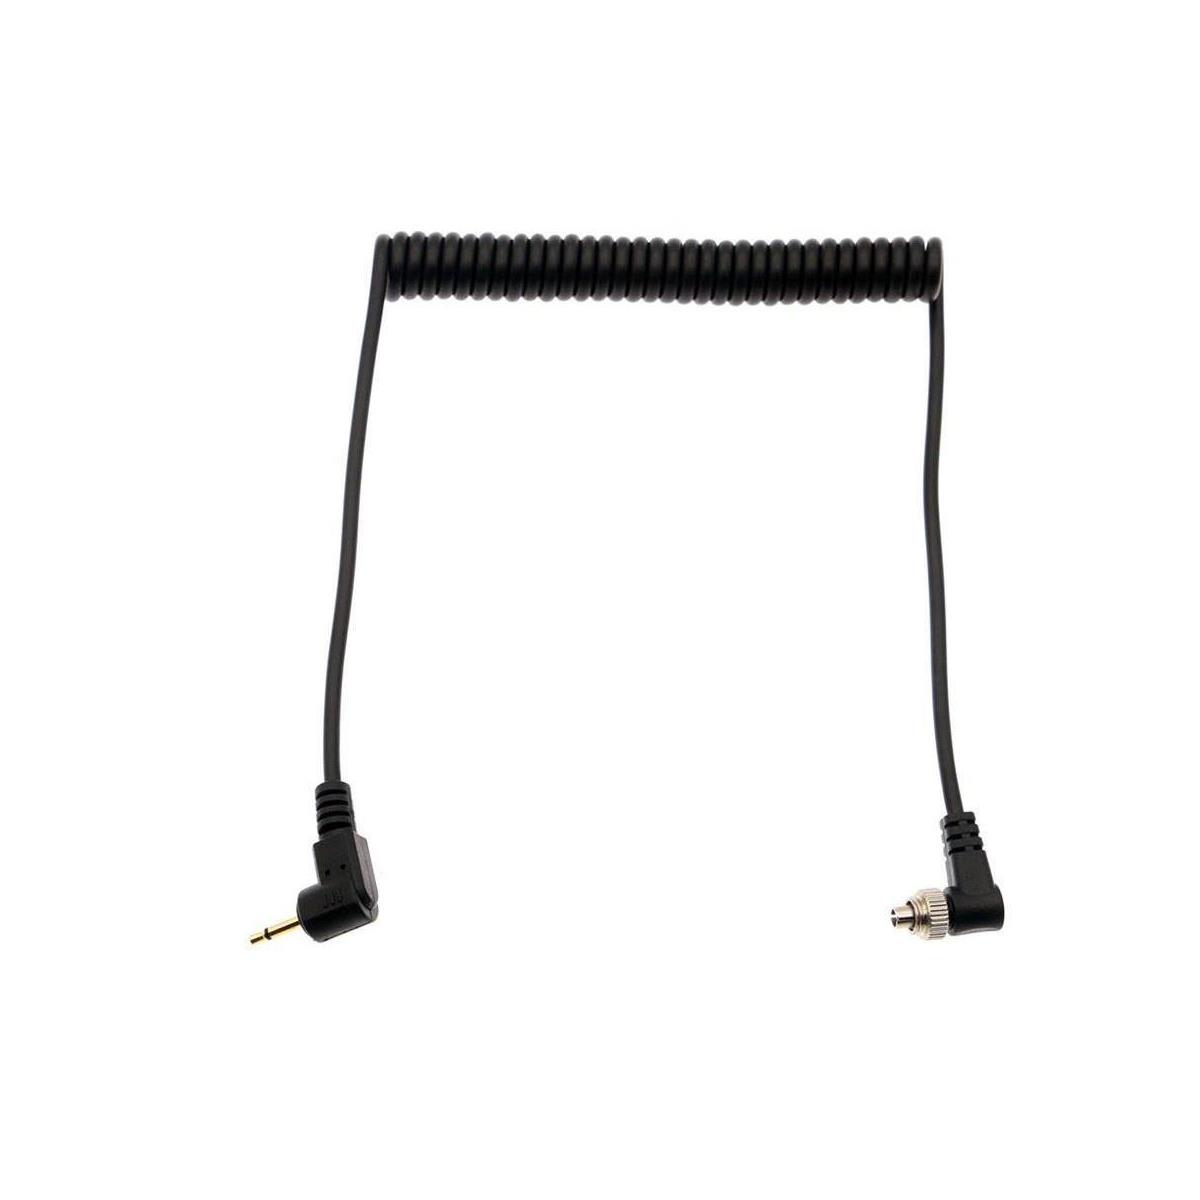 Image of Pluto Trigger Flash PC Sync cable for Speedlite Flashes